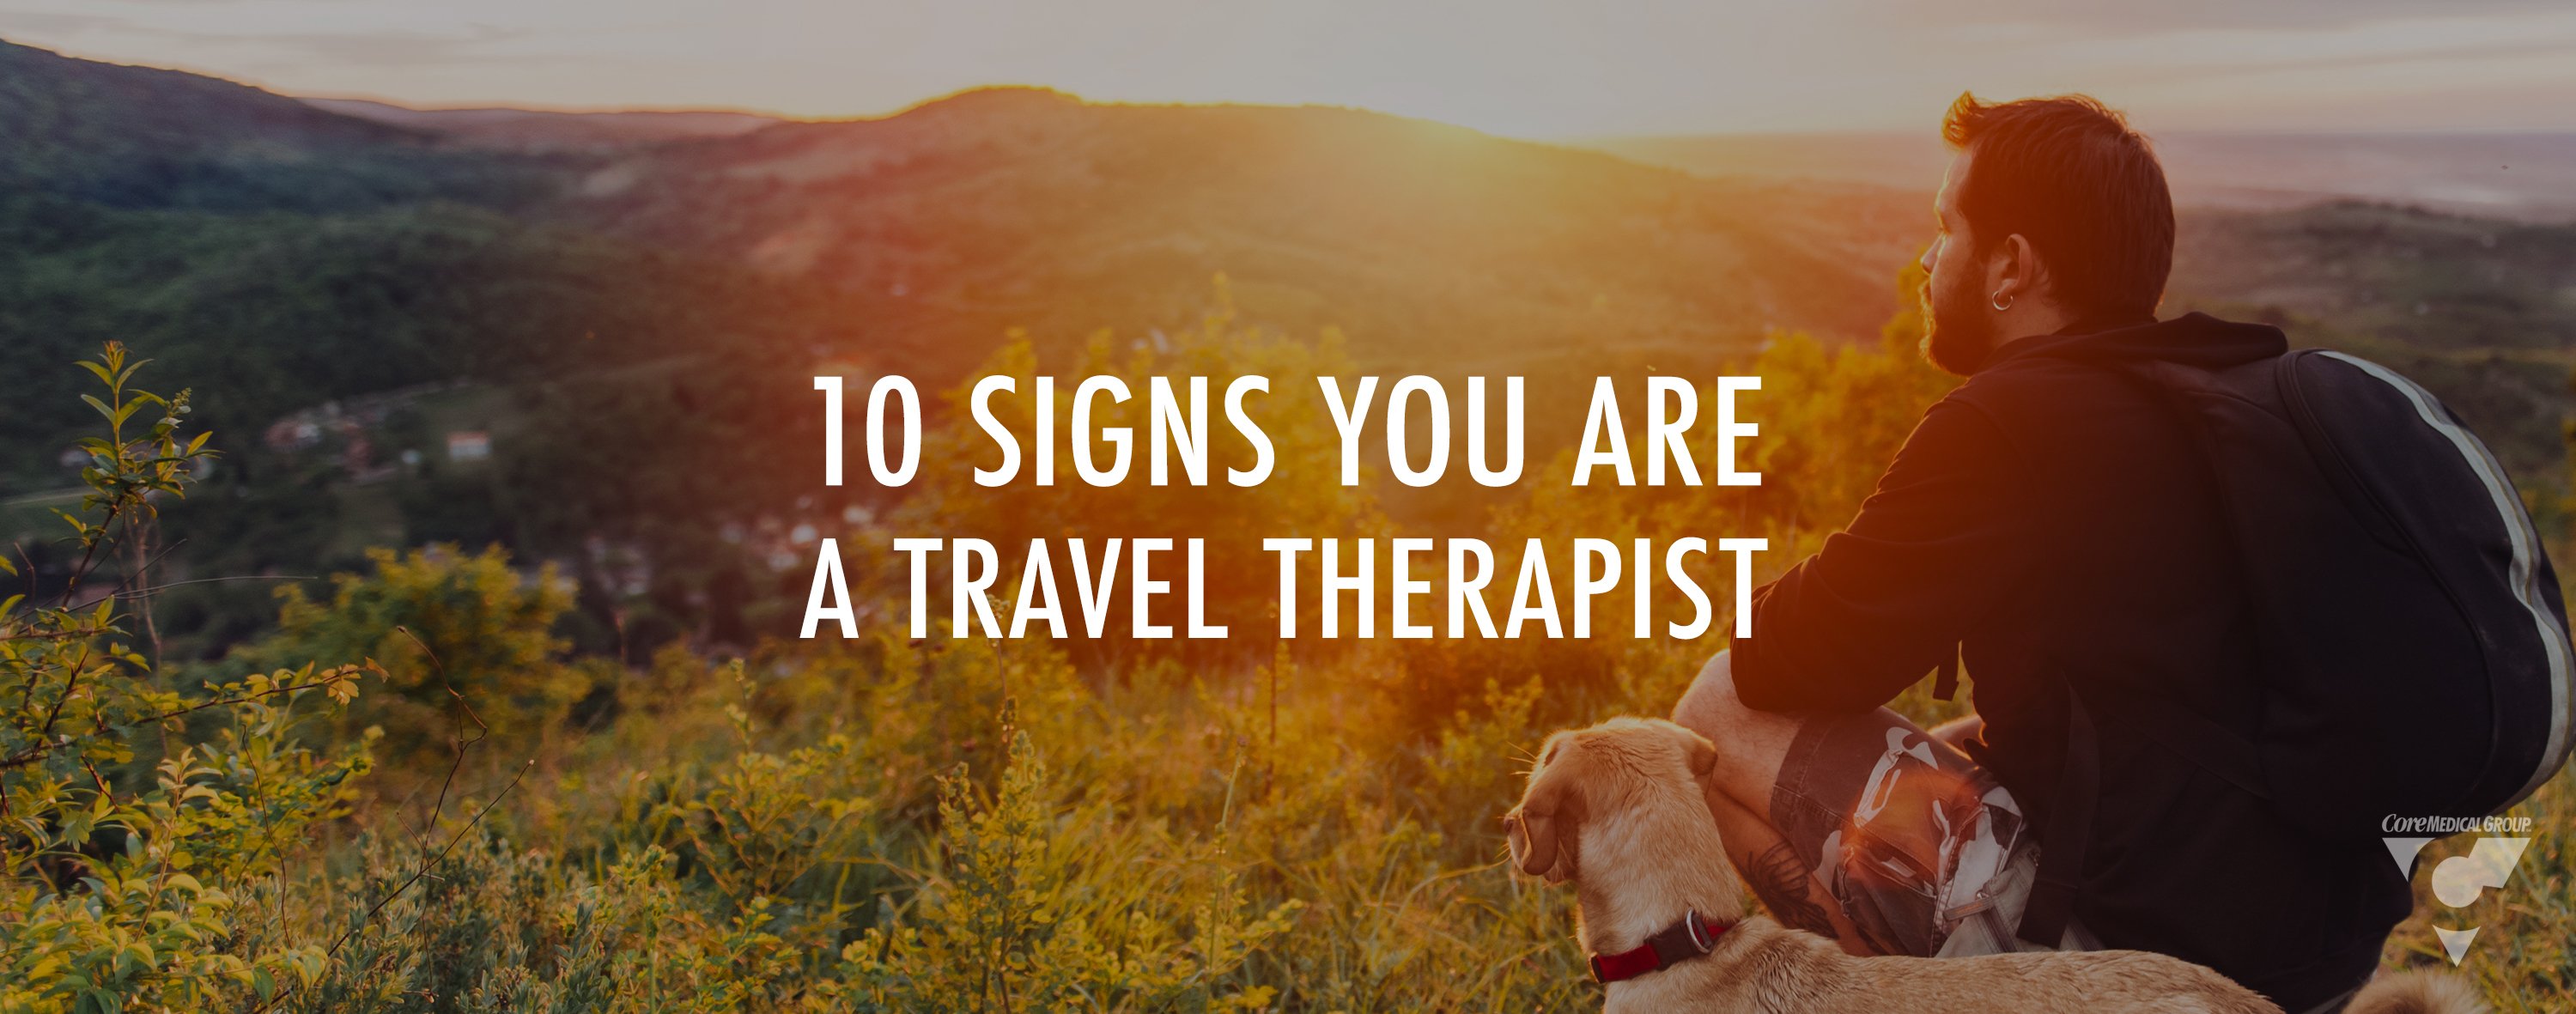 10 signs you are a travel therapist core medical group